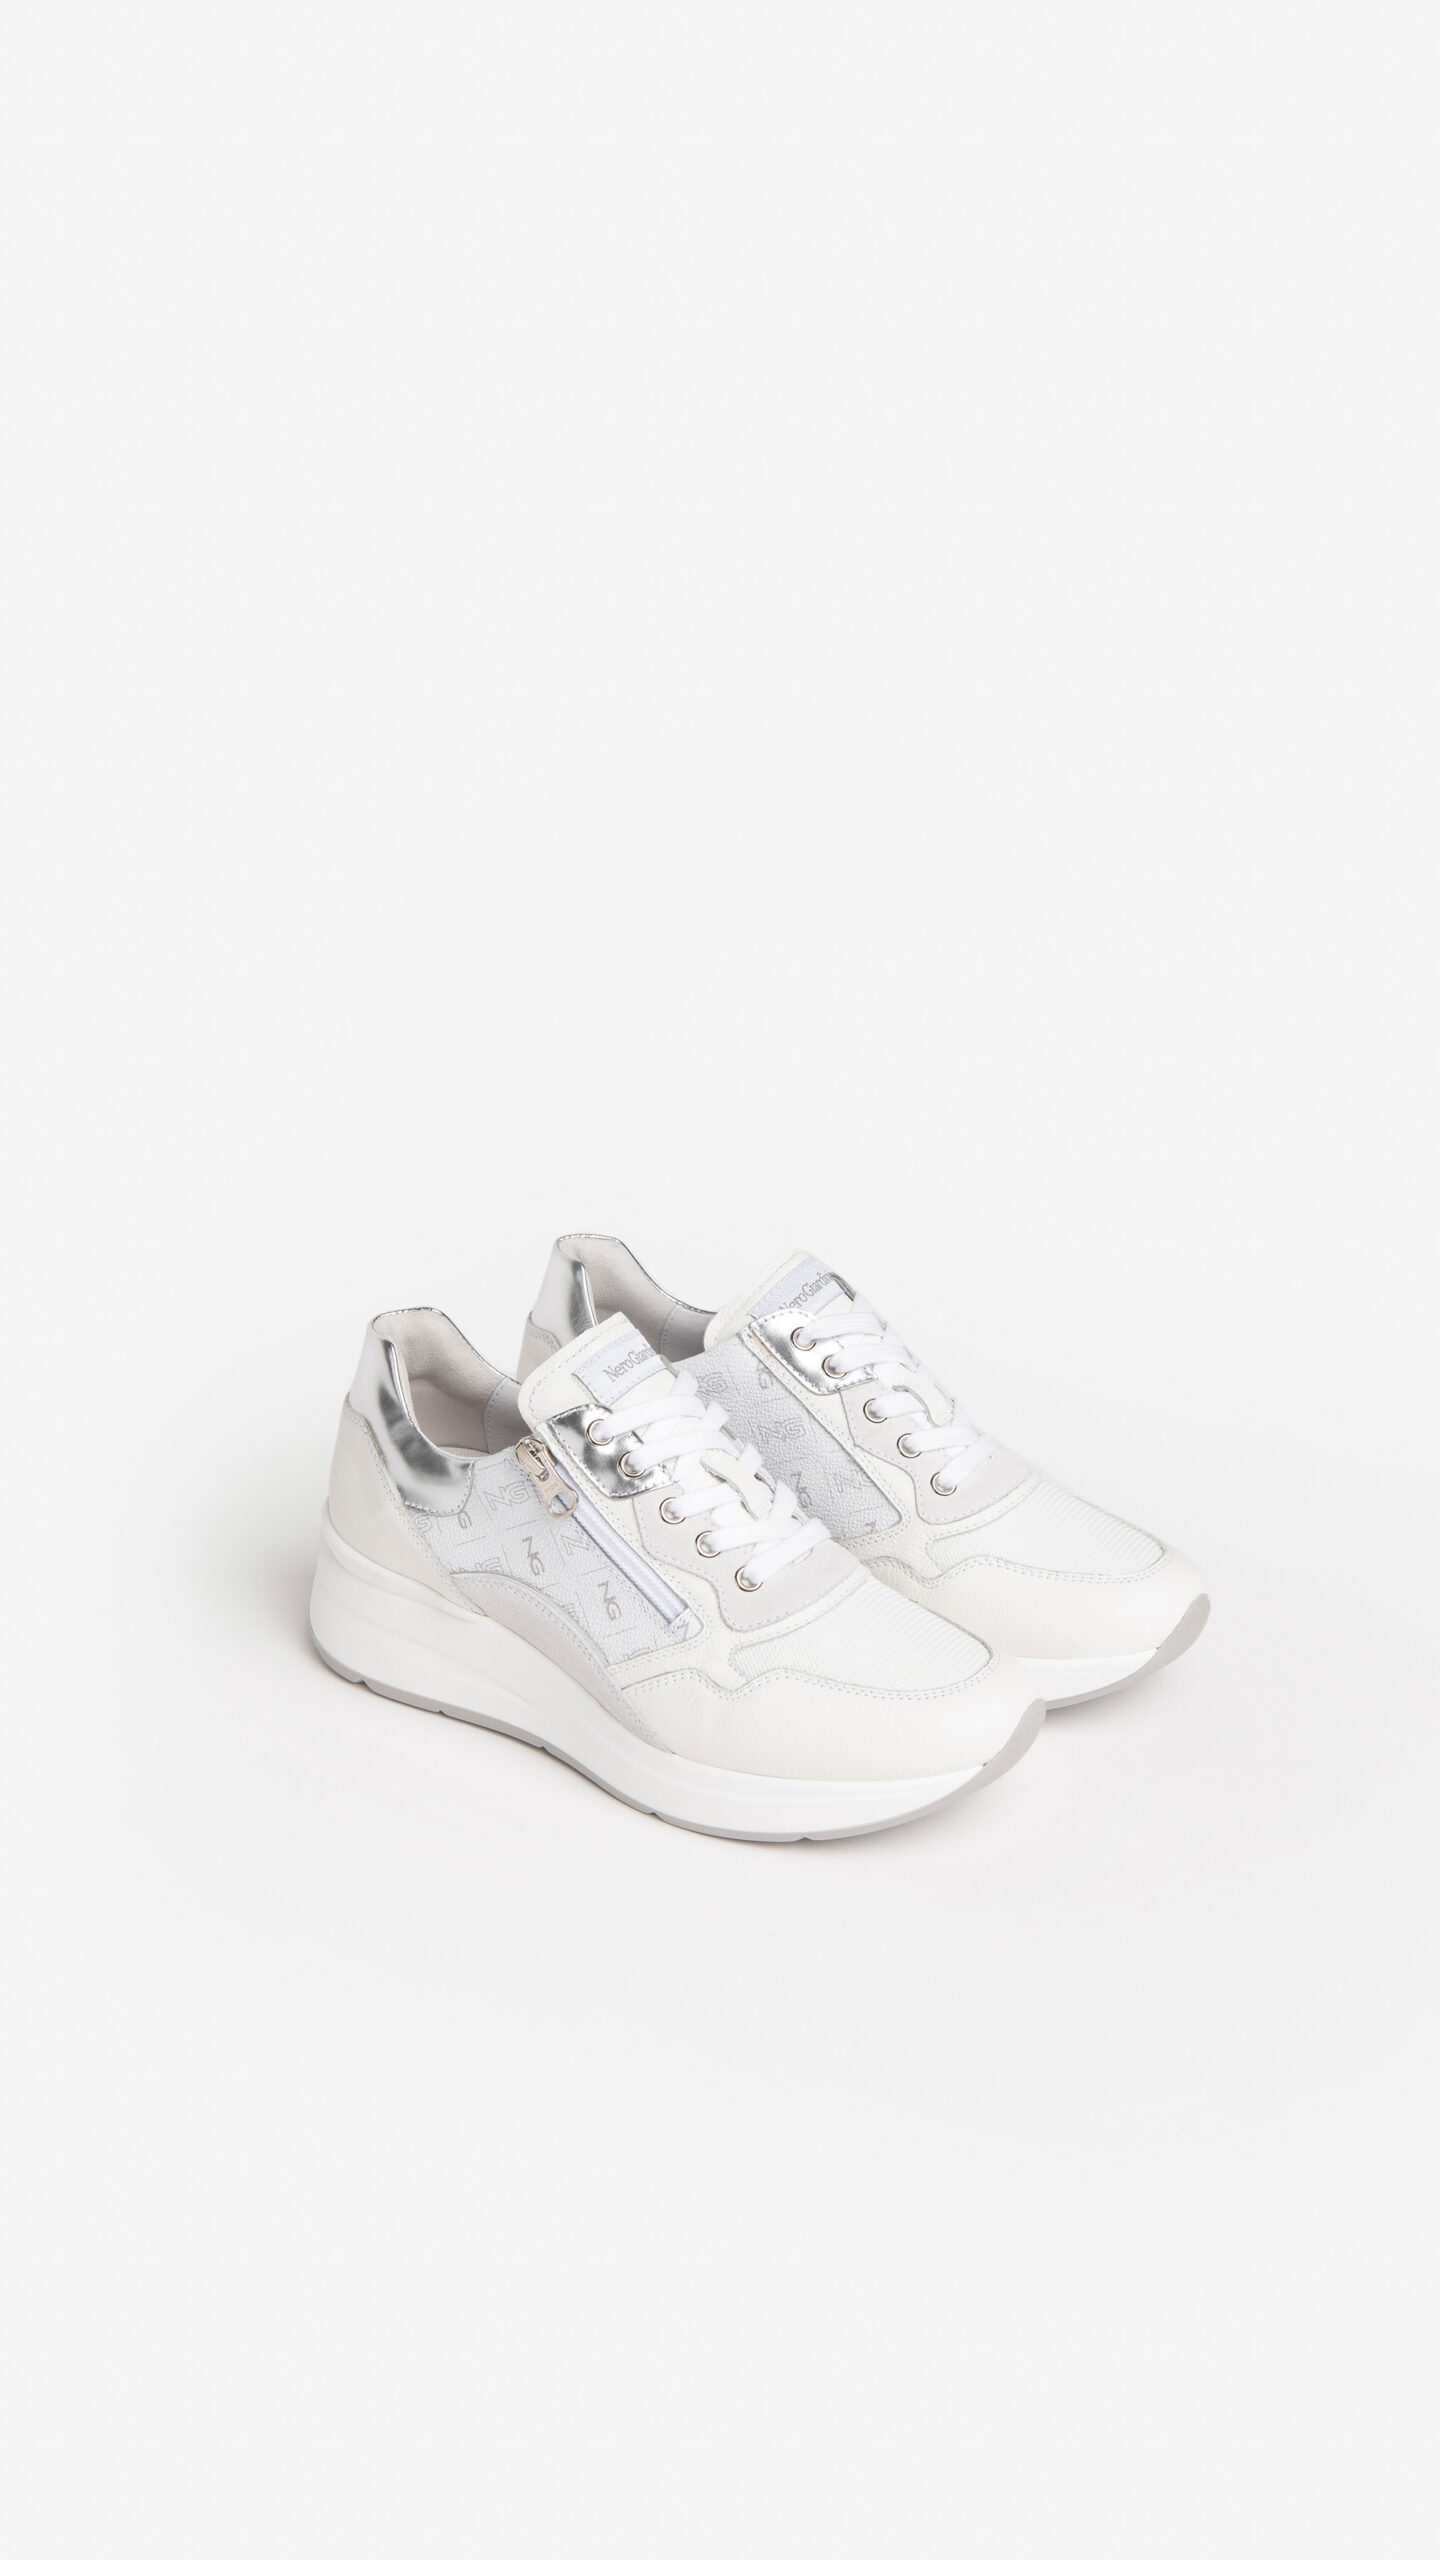 Art. E306450D 707 - Women's Leather and Suede Sneakers - Bianco -  NeroGiardini